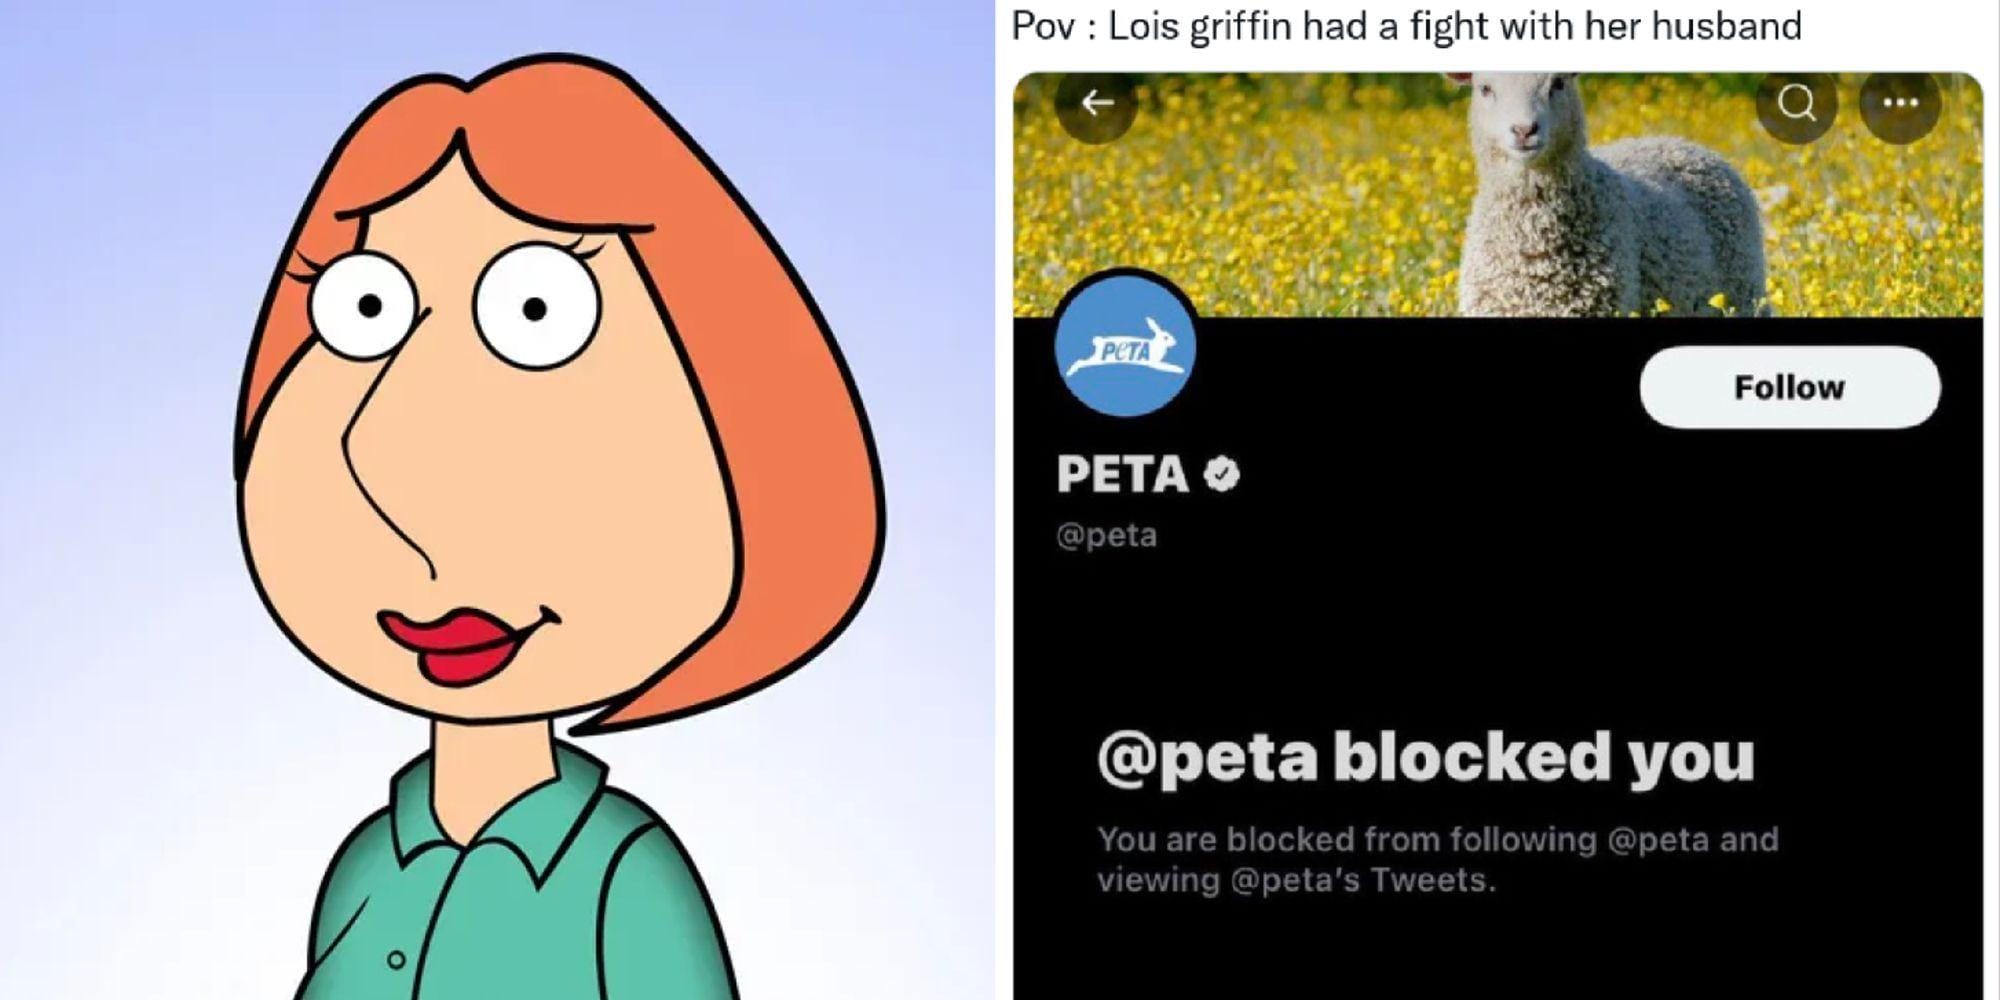 Split image of Lois Griffin from Family Guy and a PETA meme